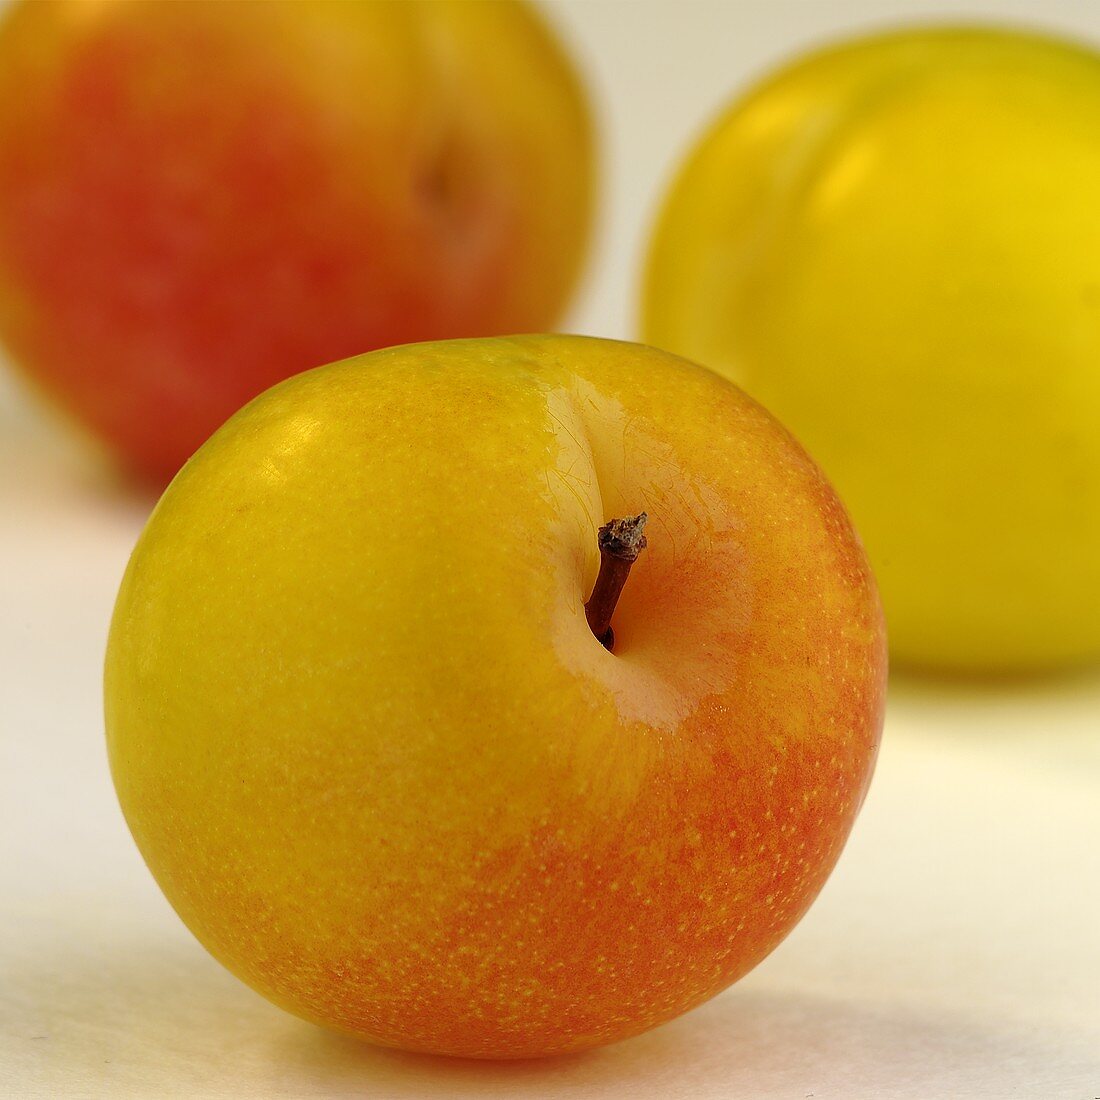 Yellowish-red plums